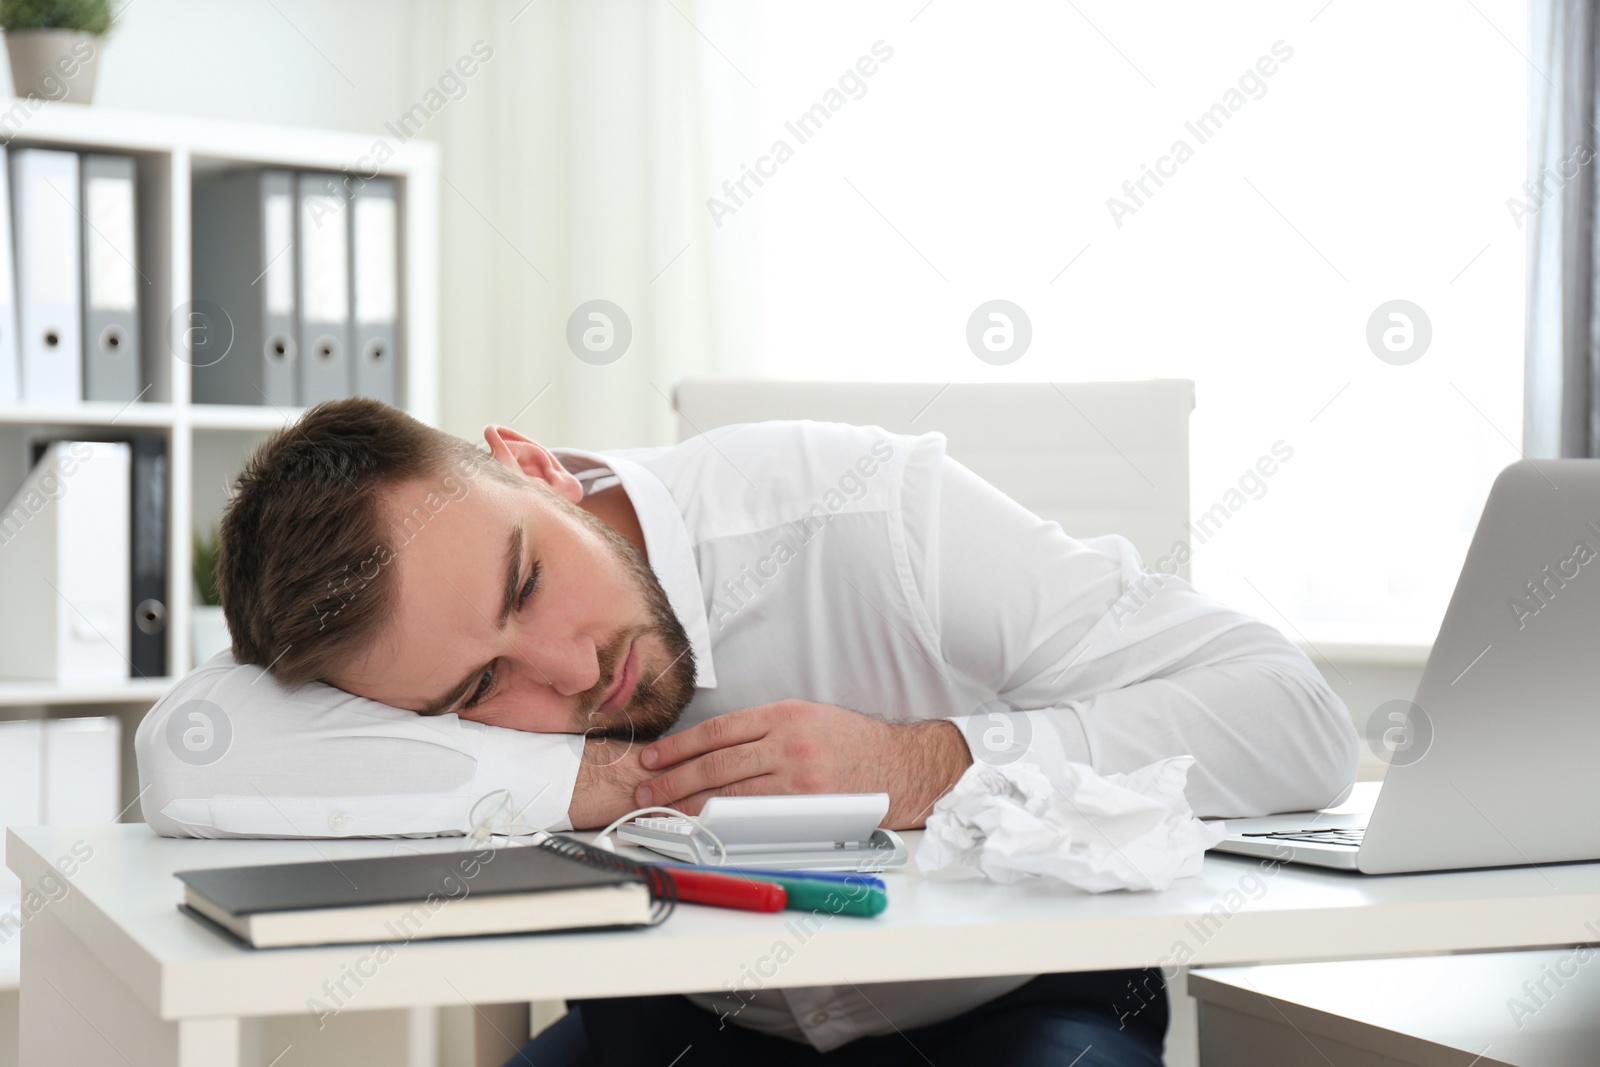 Photo of Lazy young man wasting time at messy table in office